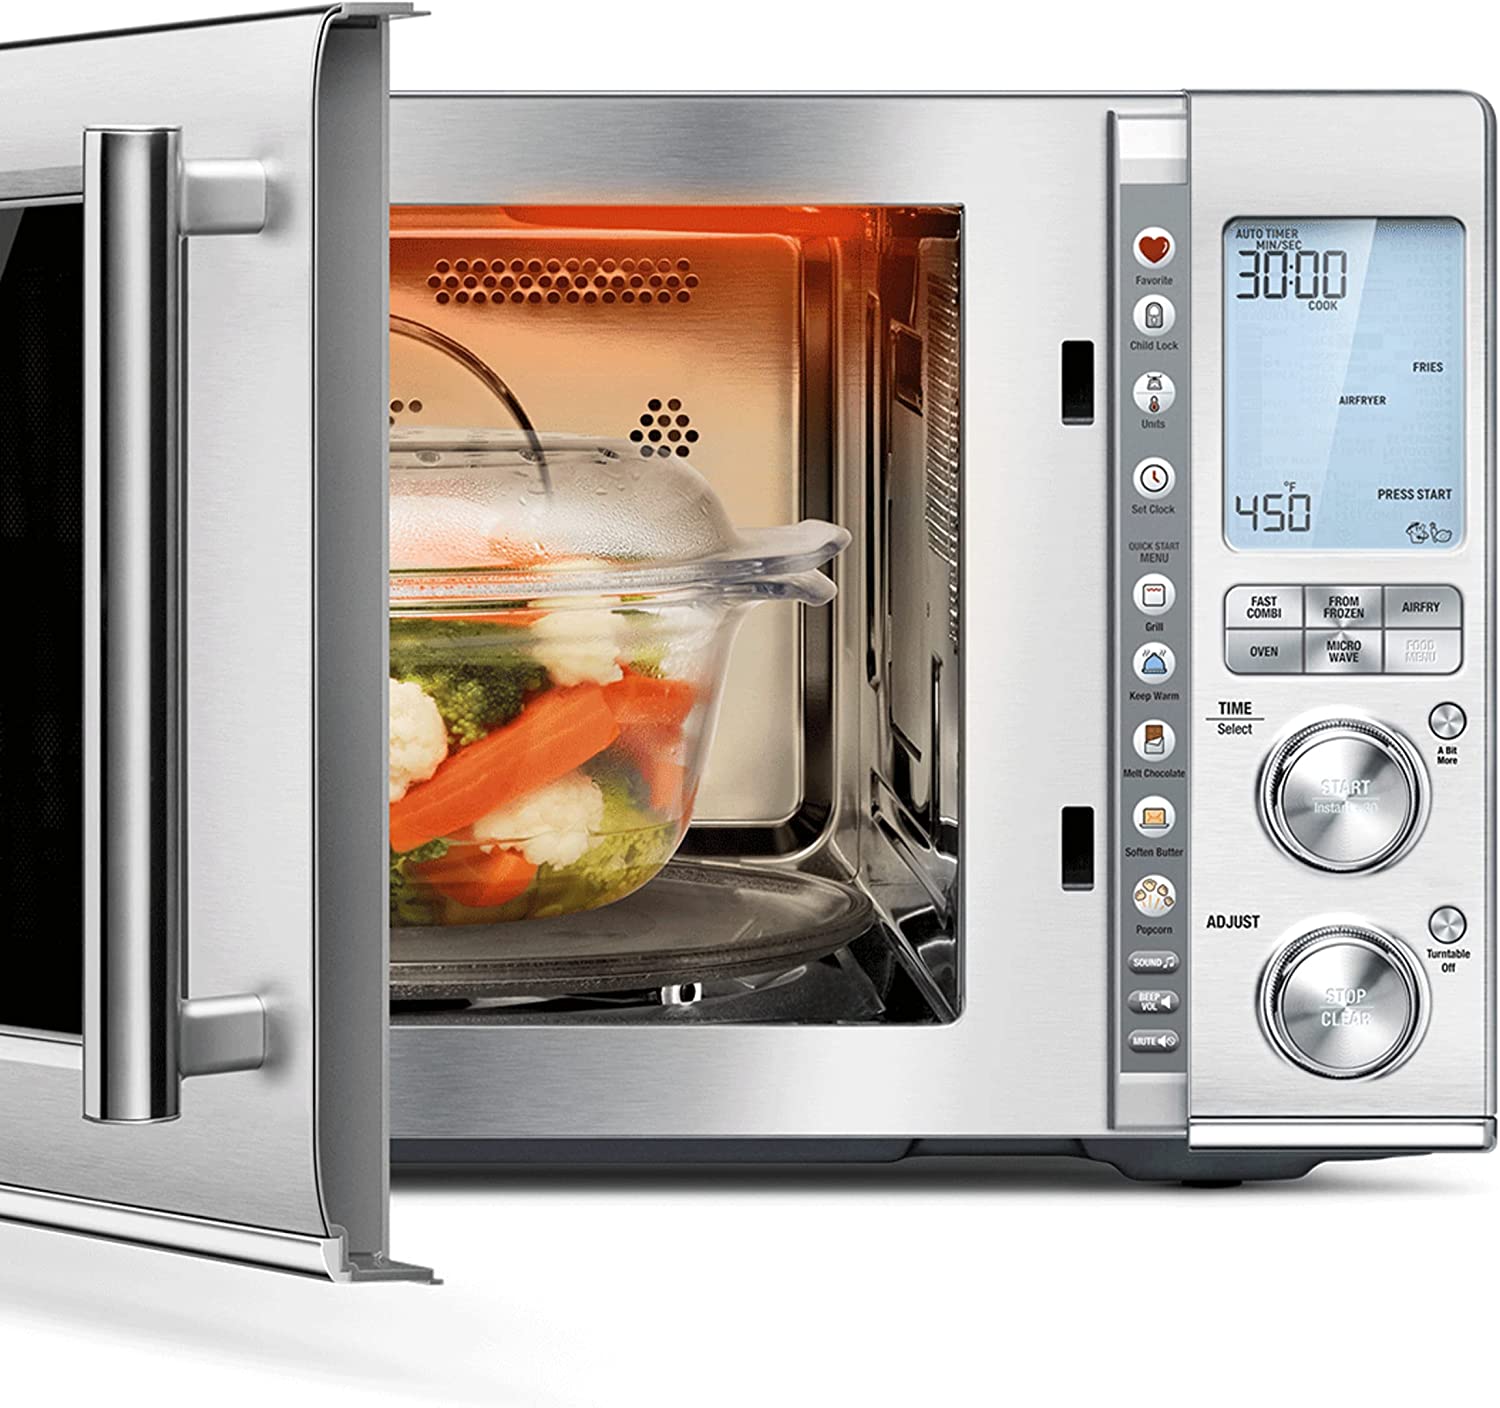 Breville Combi Wave 3-in-1 Microwave, Air Fryer, and Toaster Oven, Brushed Stainless Steel - image 3 of 4